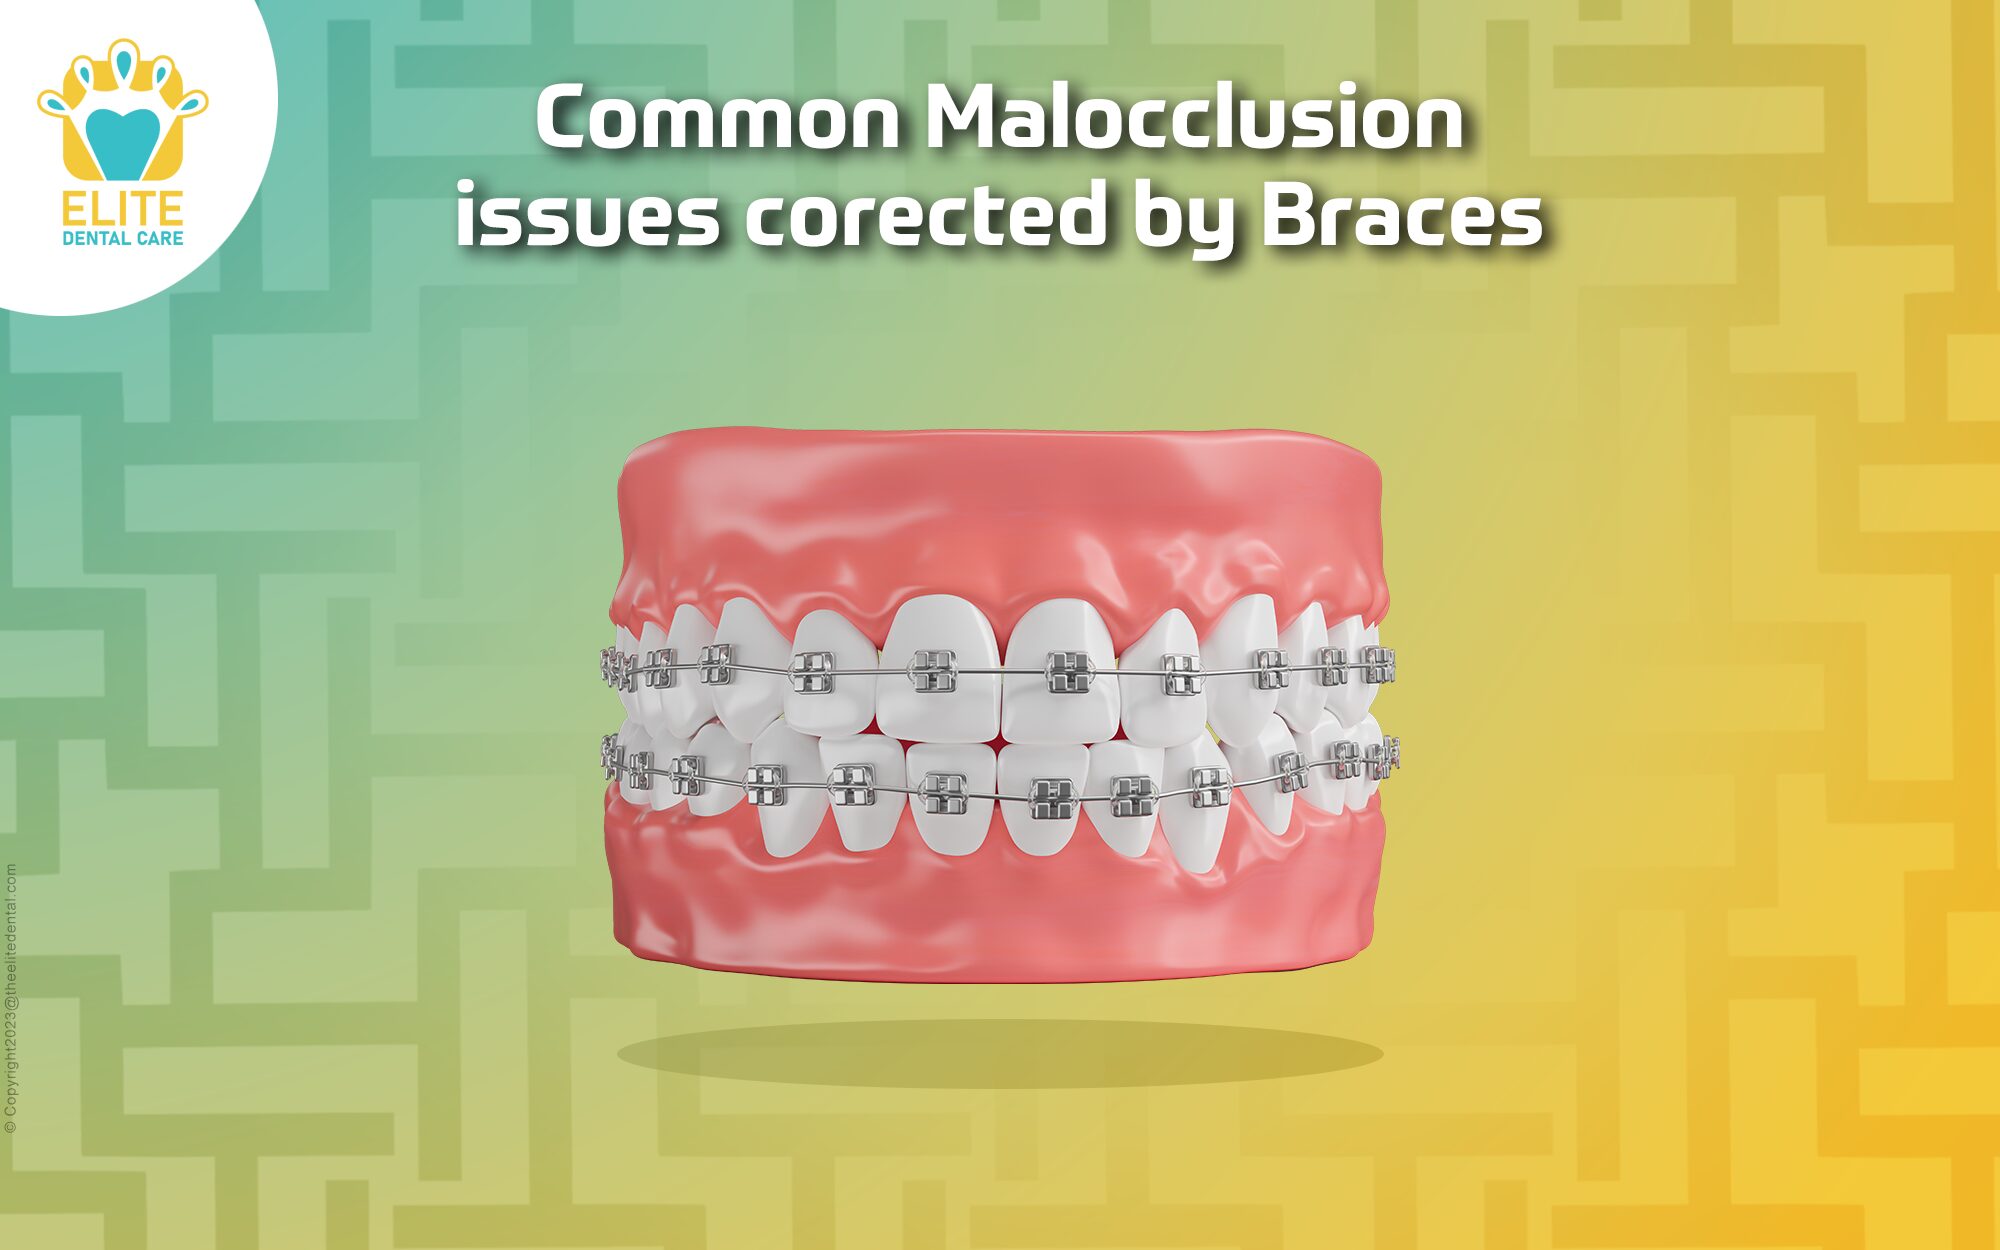 COMMON MALOCCLUSION ISSUES CORRECTED BY BRACES